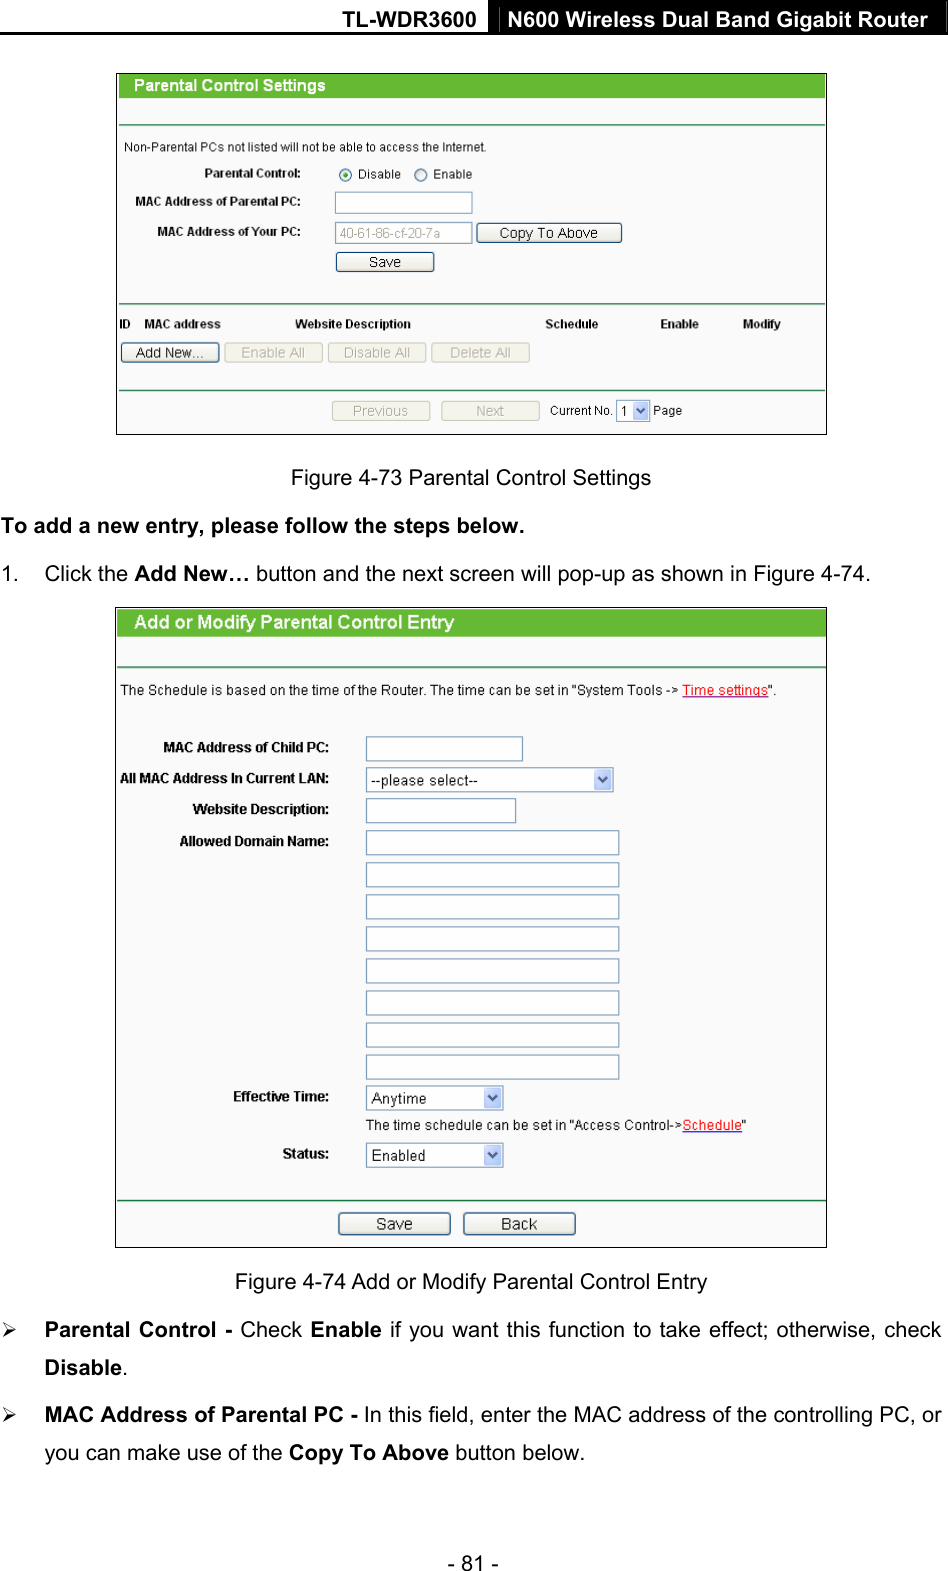 TL-WDR3600 N600 Wireless Dual Band Gigabit Router  - 81 -  Figure 4-73 Parental Control Settings To add a new entry, please follow the steps below. 1. Click the Add New… button and the next screen will pop-up as shown in Figure 4-74.  Figure 4-74 Add or Modify Parental Control Entry ¾ Parental Control - Check Enable if you want this function to take effect; otherwise, check Disable.  ¾ MAC Address of Parental PC - In this field, enter the MAC address of the controlling PC, or you can make use of the Copy To Above button below.   